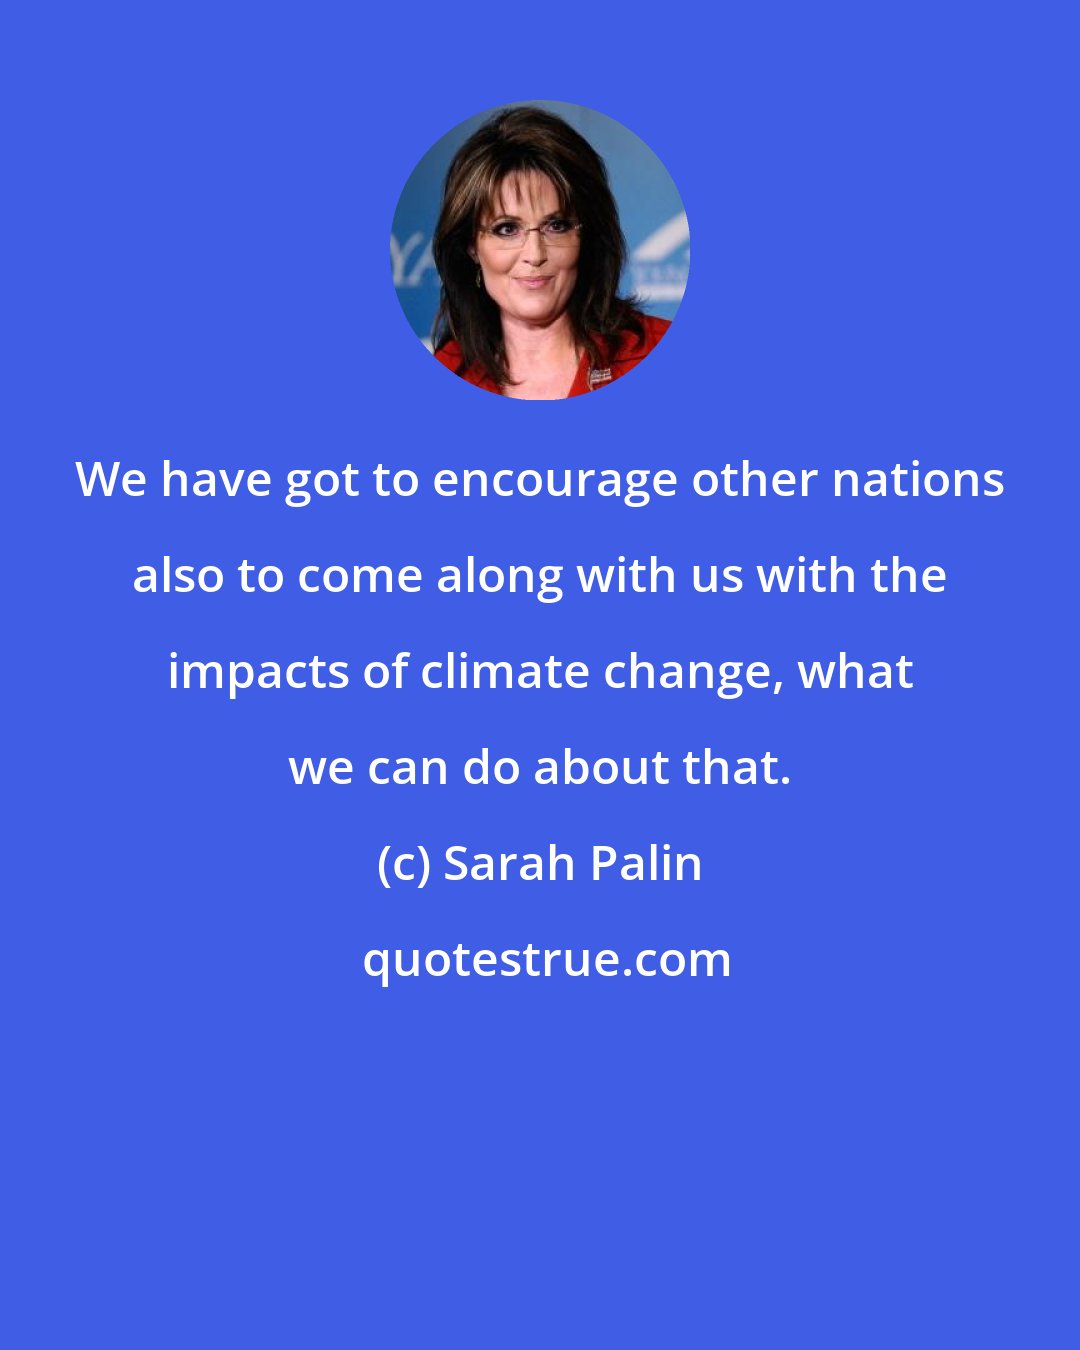 Sarah Palin: We have got to encourage other nations also to come along with us with the impacts of climate change, what we can do about that.